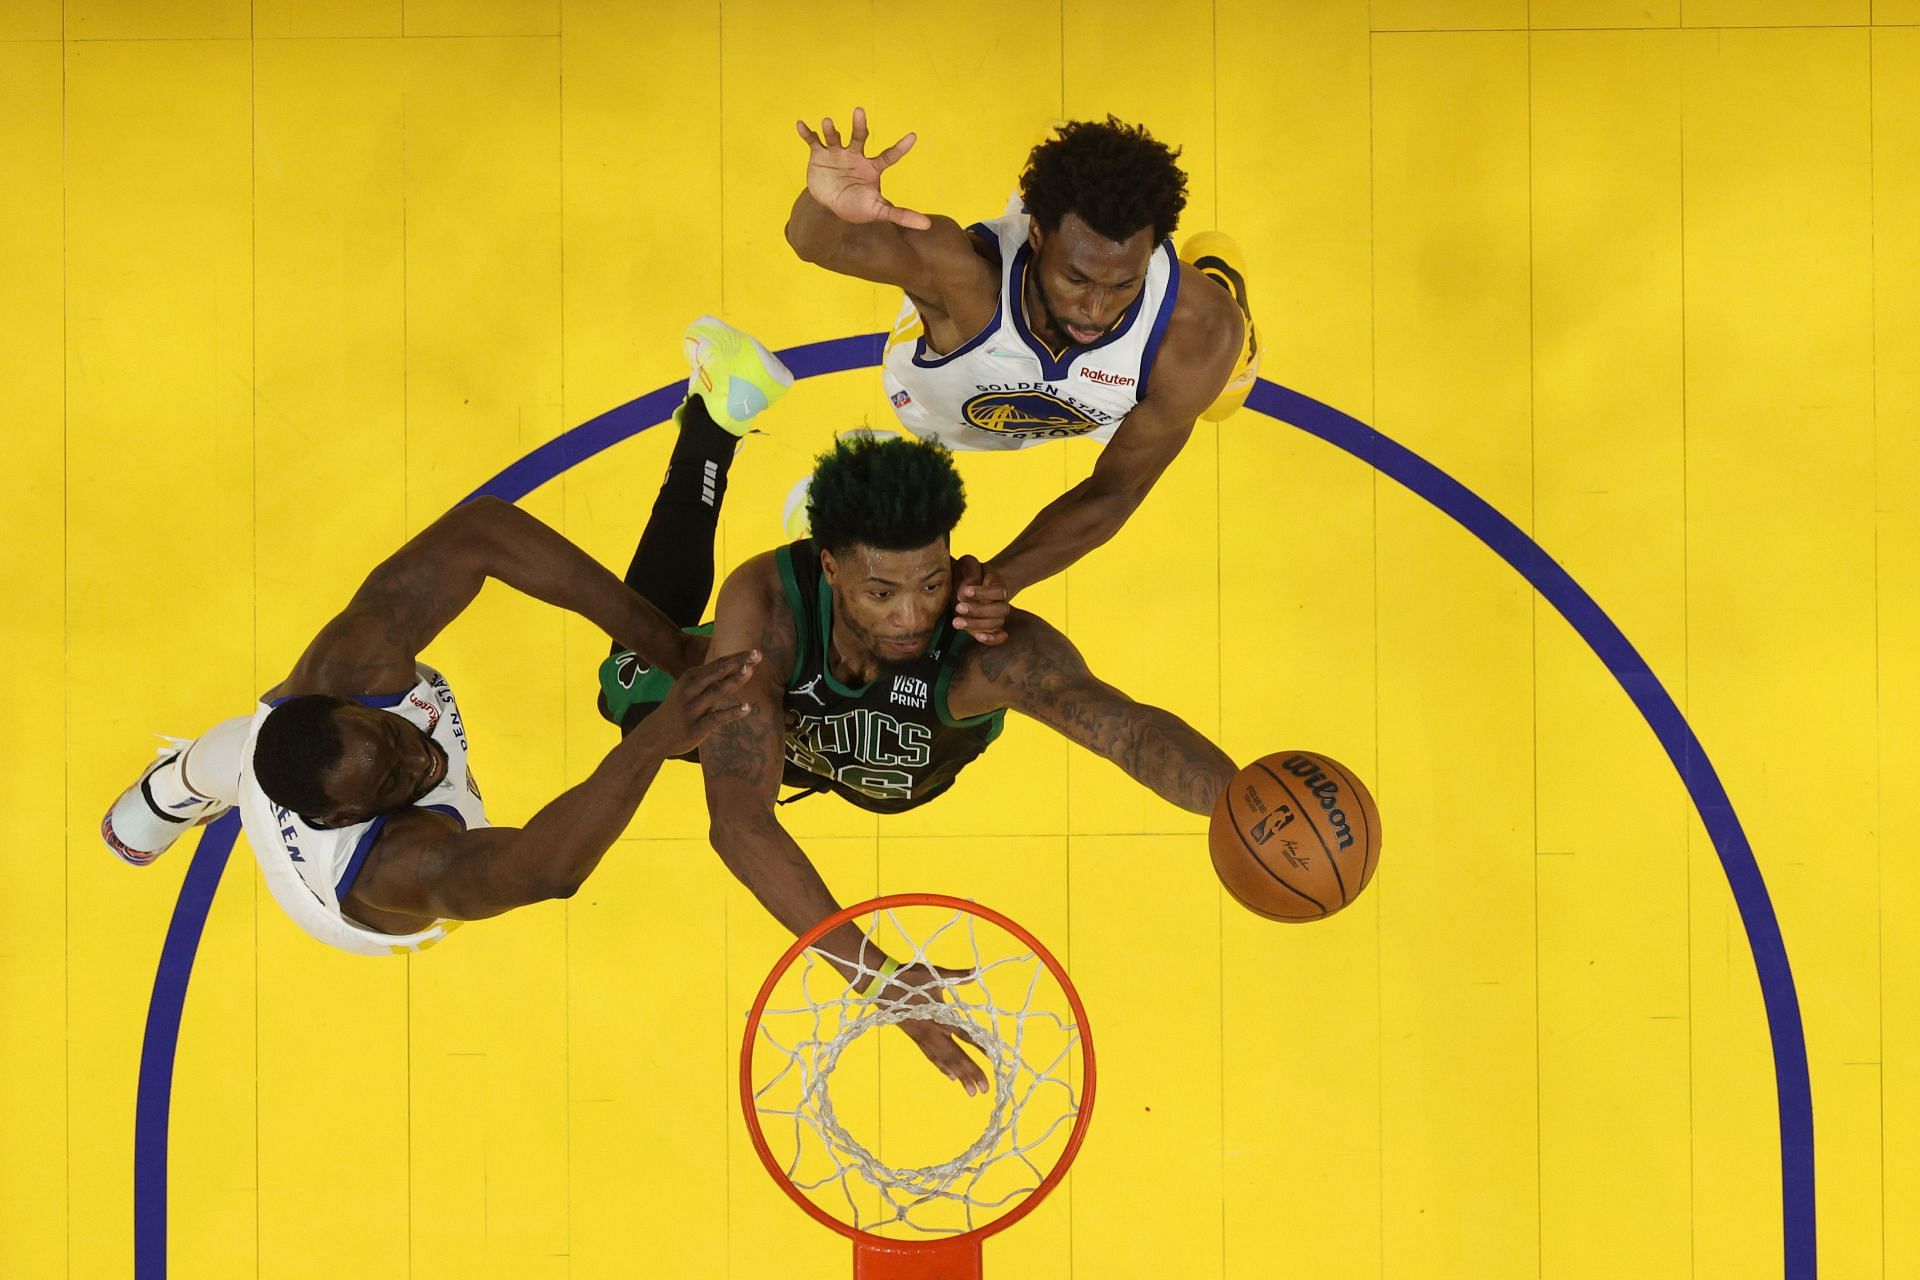 Marcus Smart of the Boston Celtics drives to the basket against Draymond Green, left, and Andrew Wiggins of the Golden State Warriors during the third quarter of Game 5 in the NBA Finals at Chase Center on Monday in San Francisco, California. The Golden State Warriors won 104-94.